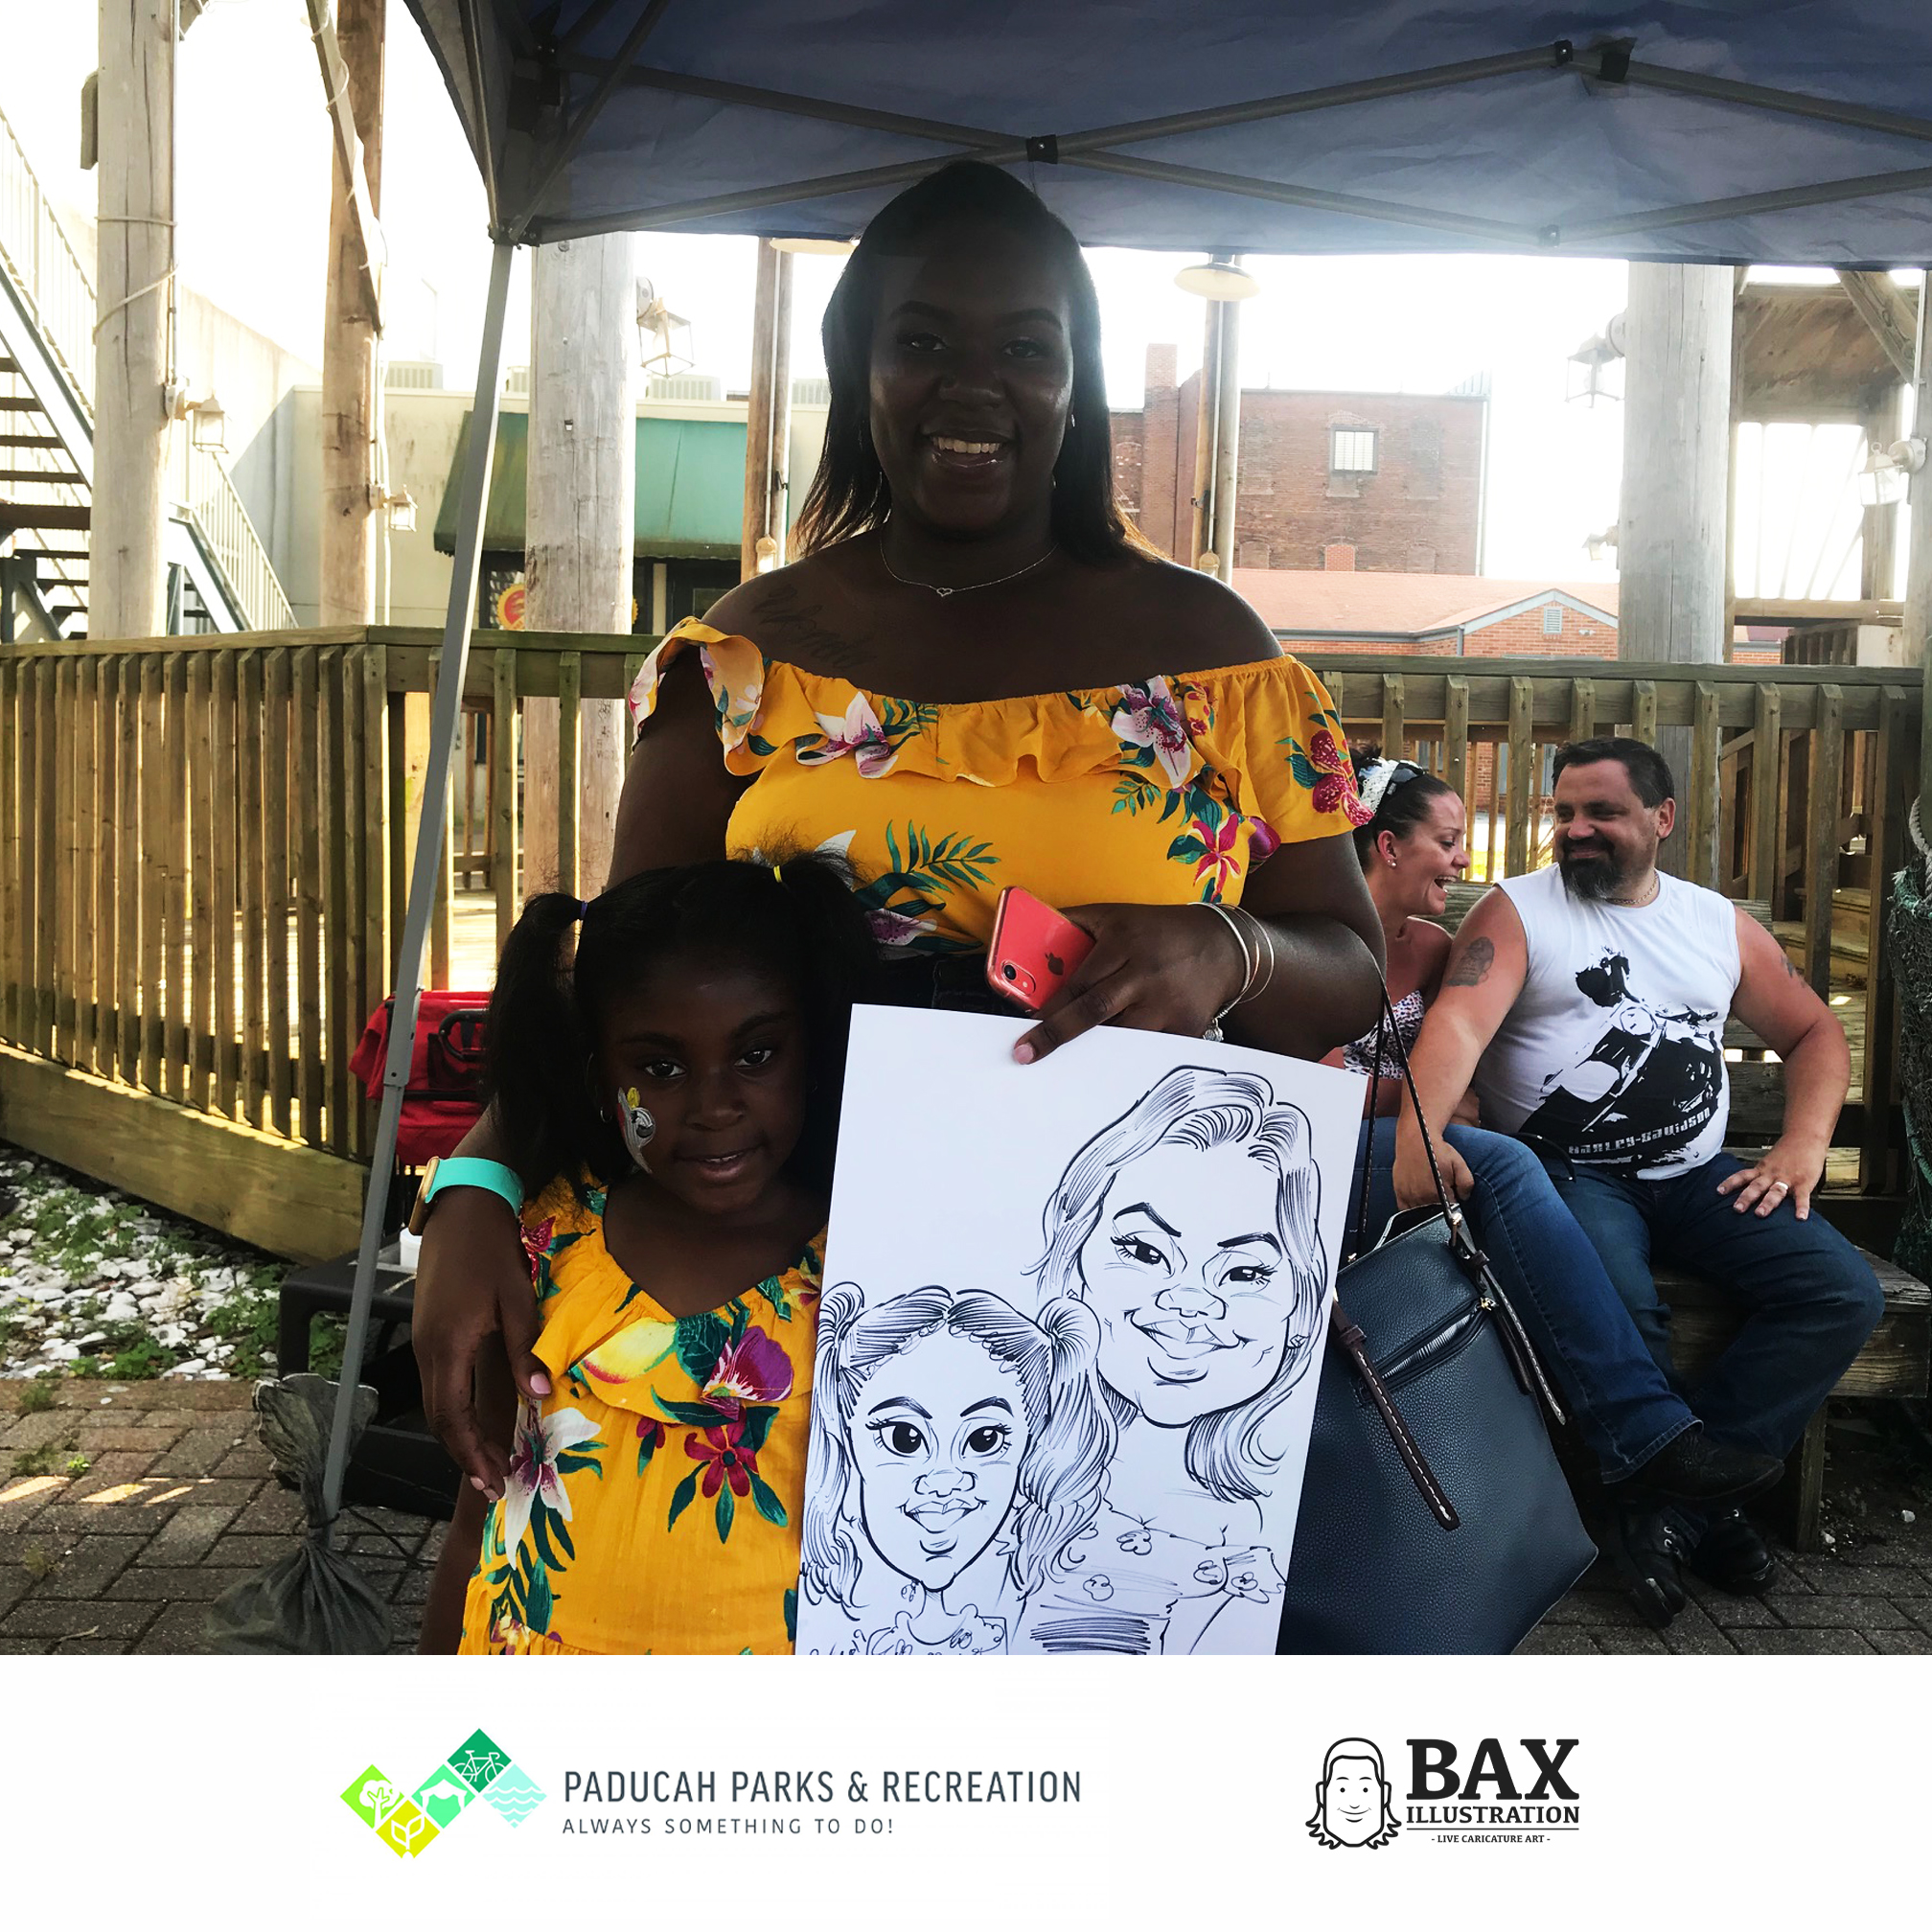 Girls holding caricature by Bax Illustration in Paducah Kentucky at the 2019 Independence Day Celebration